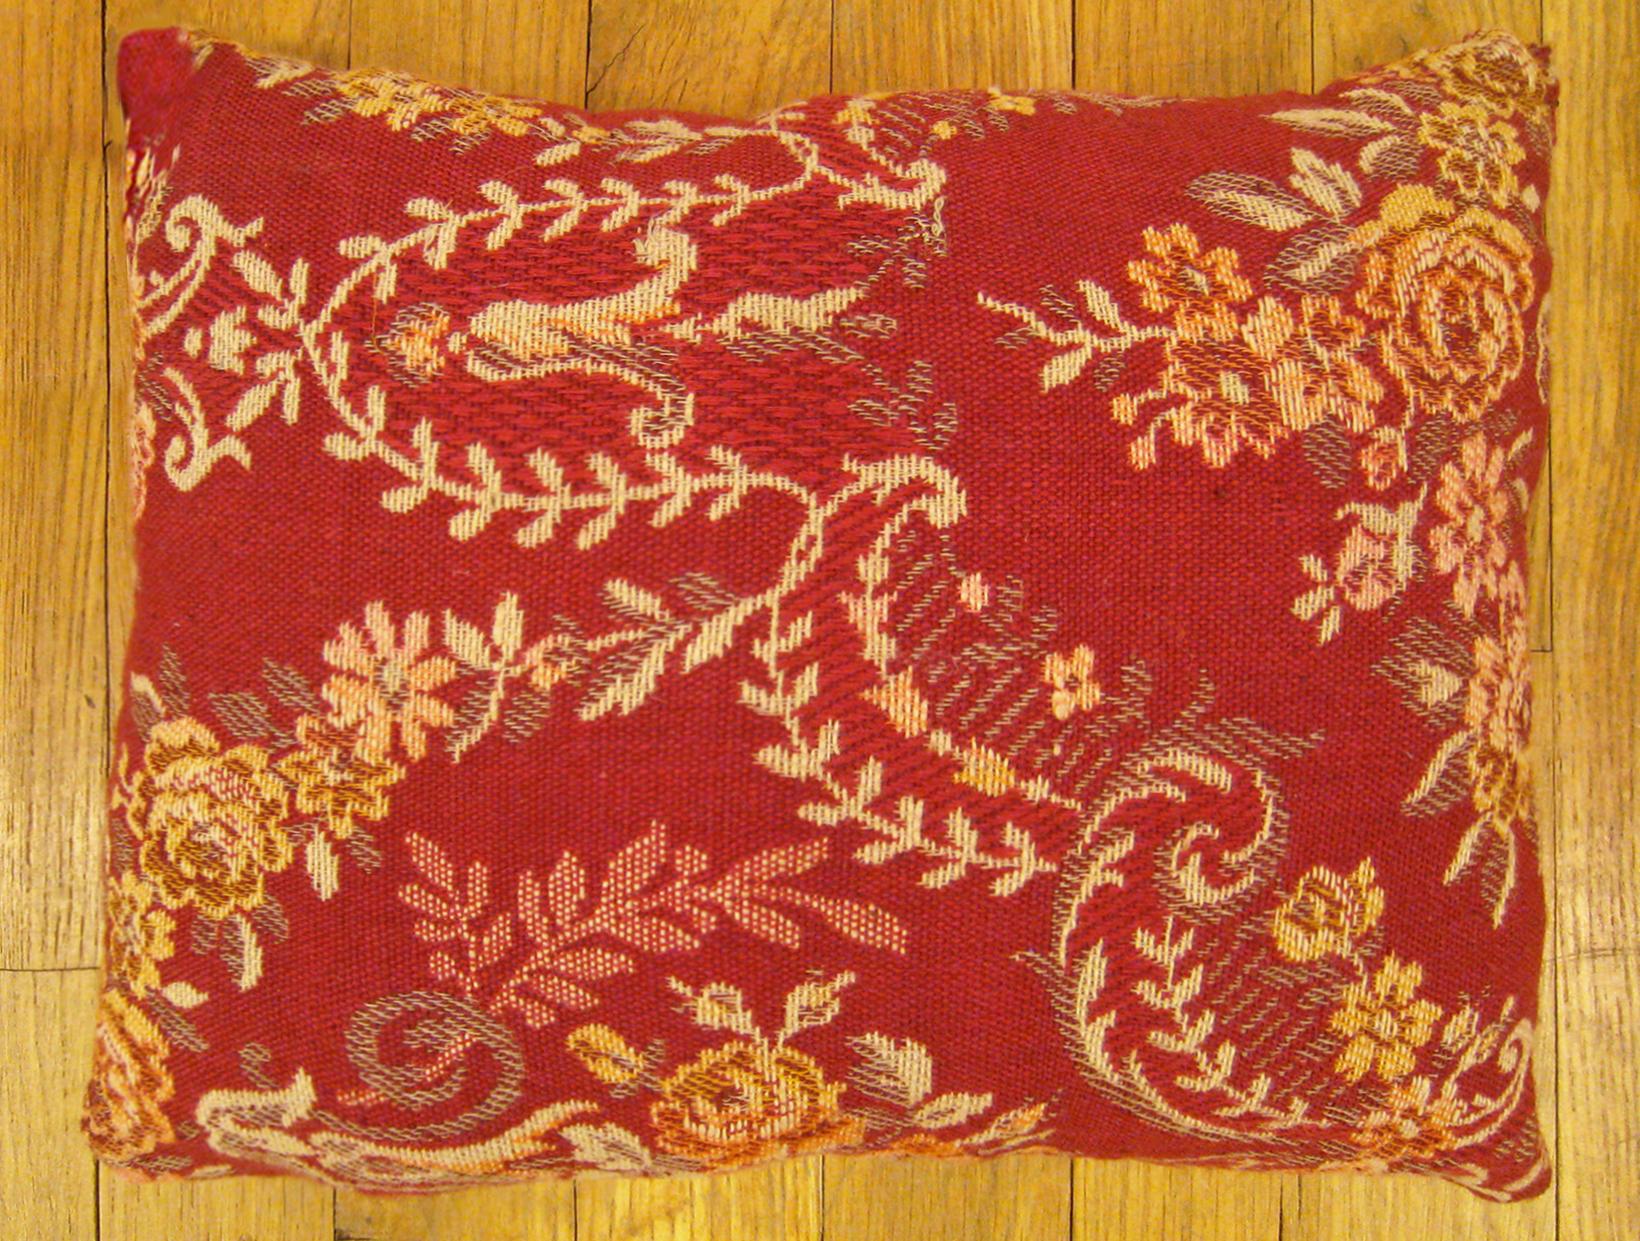 Antique Jacquard tapestry pillow; size 1'0” x 1'2”.

An antique decorative pillow with floral elements allover a red central field, size 1'0